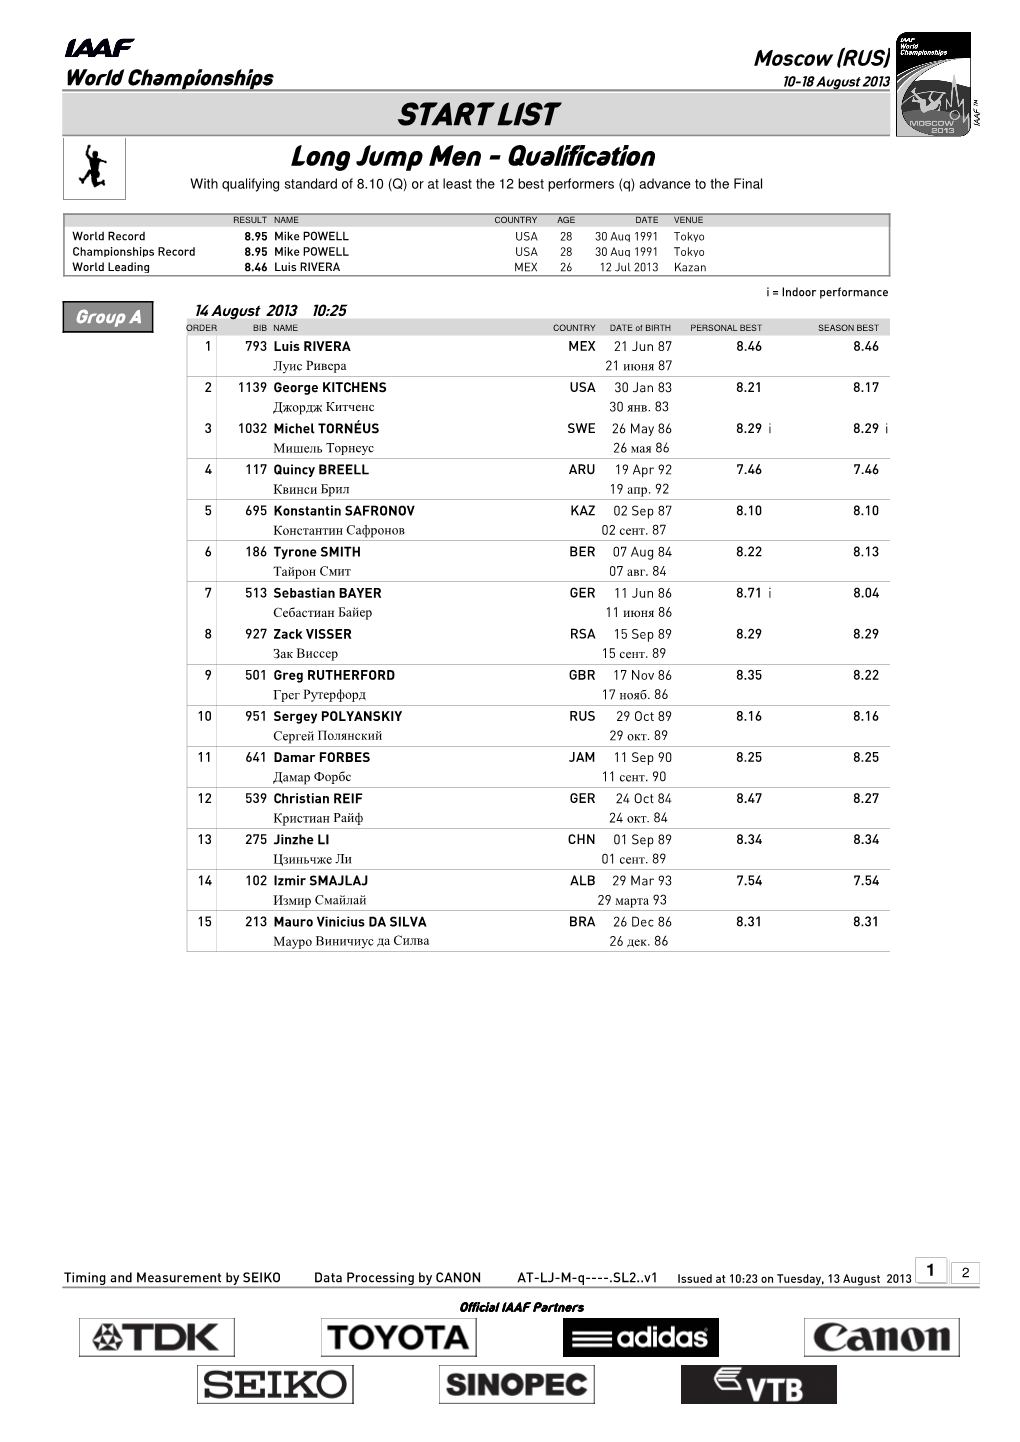 START LIST Long Jump Men - Qualification with Qualifying Standard of 8.10 (Q) Or at Least the 12 Best Performers (Q) Advance to the Final